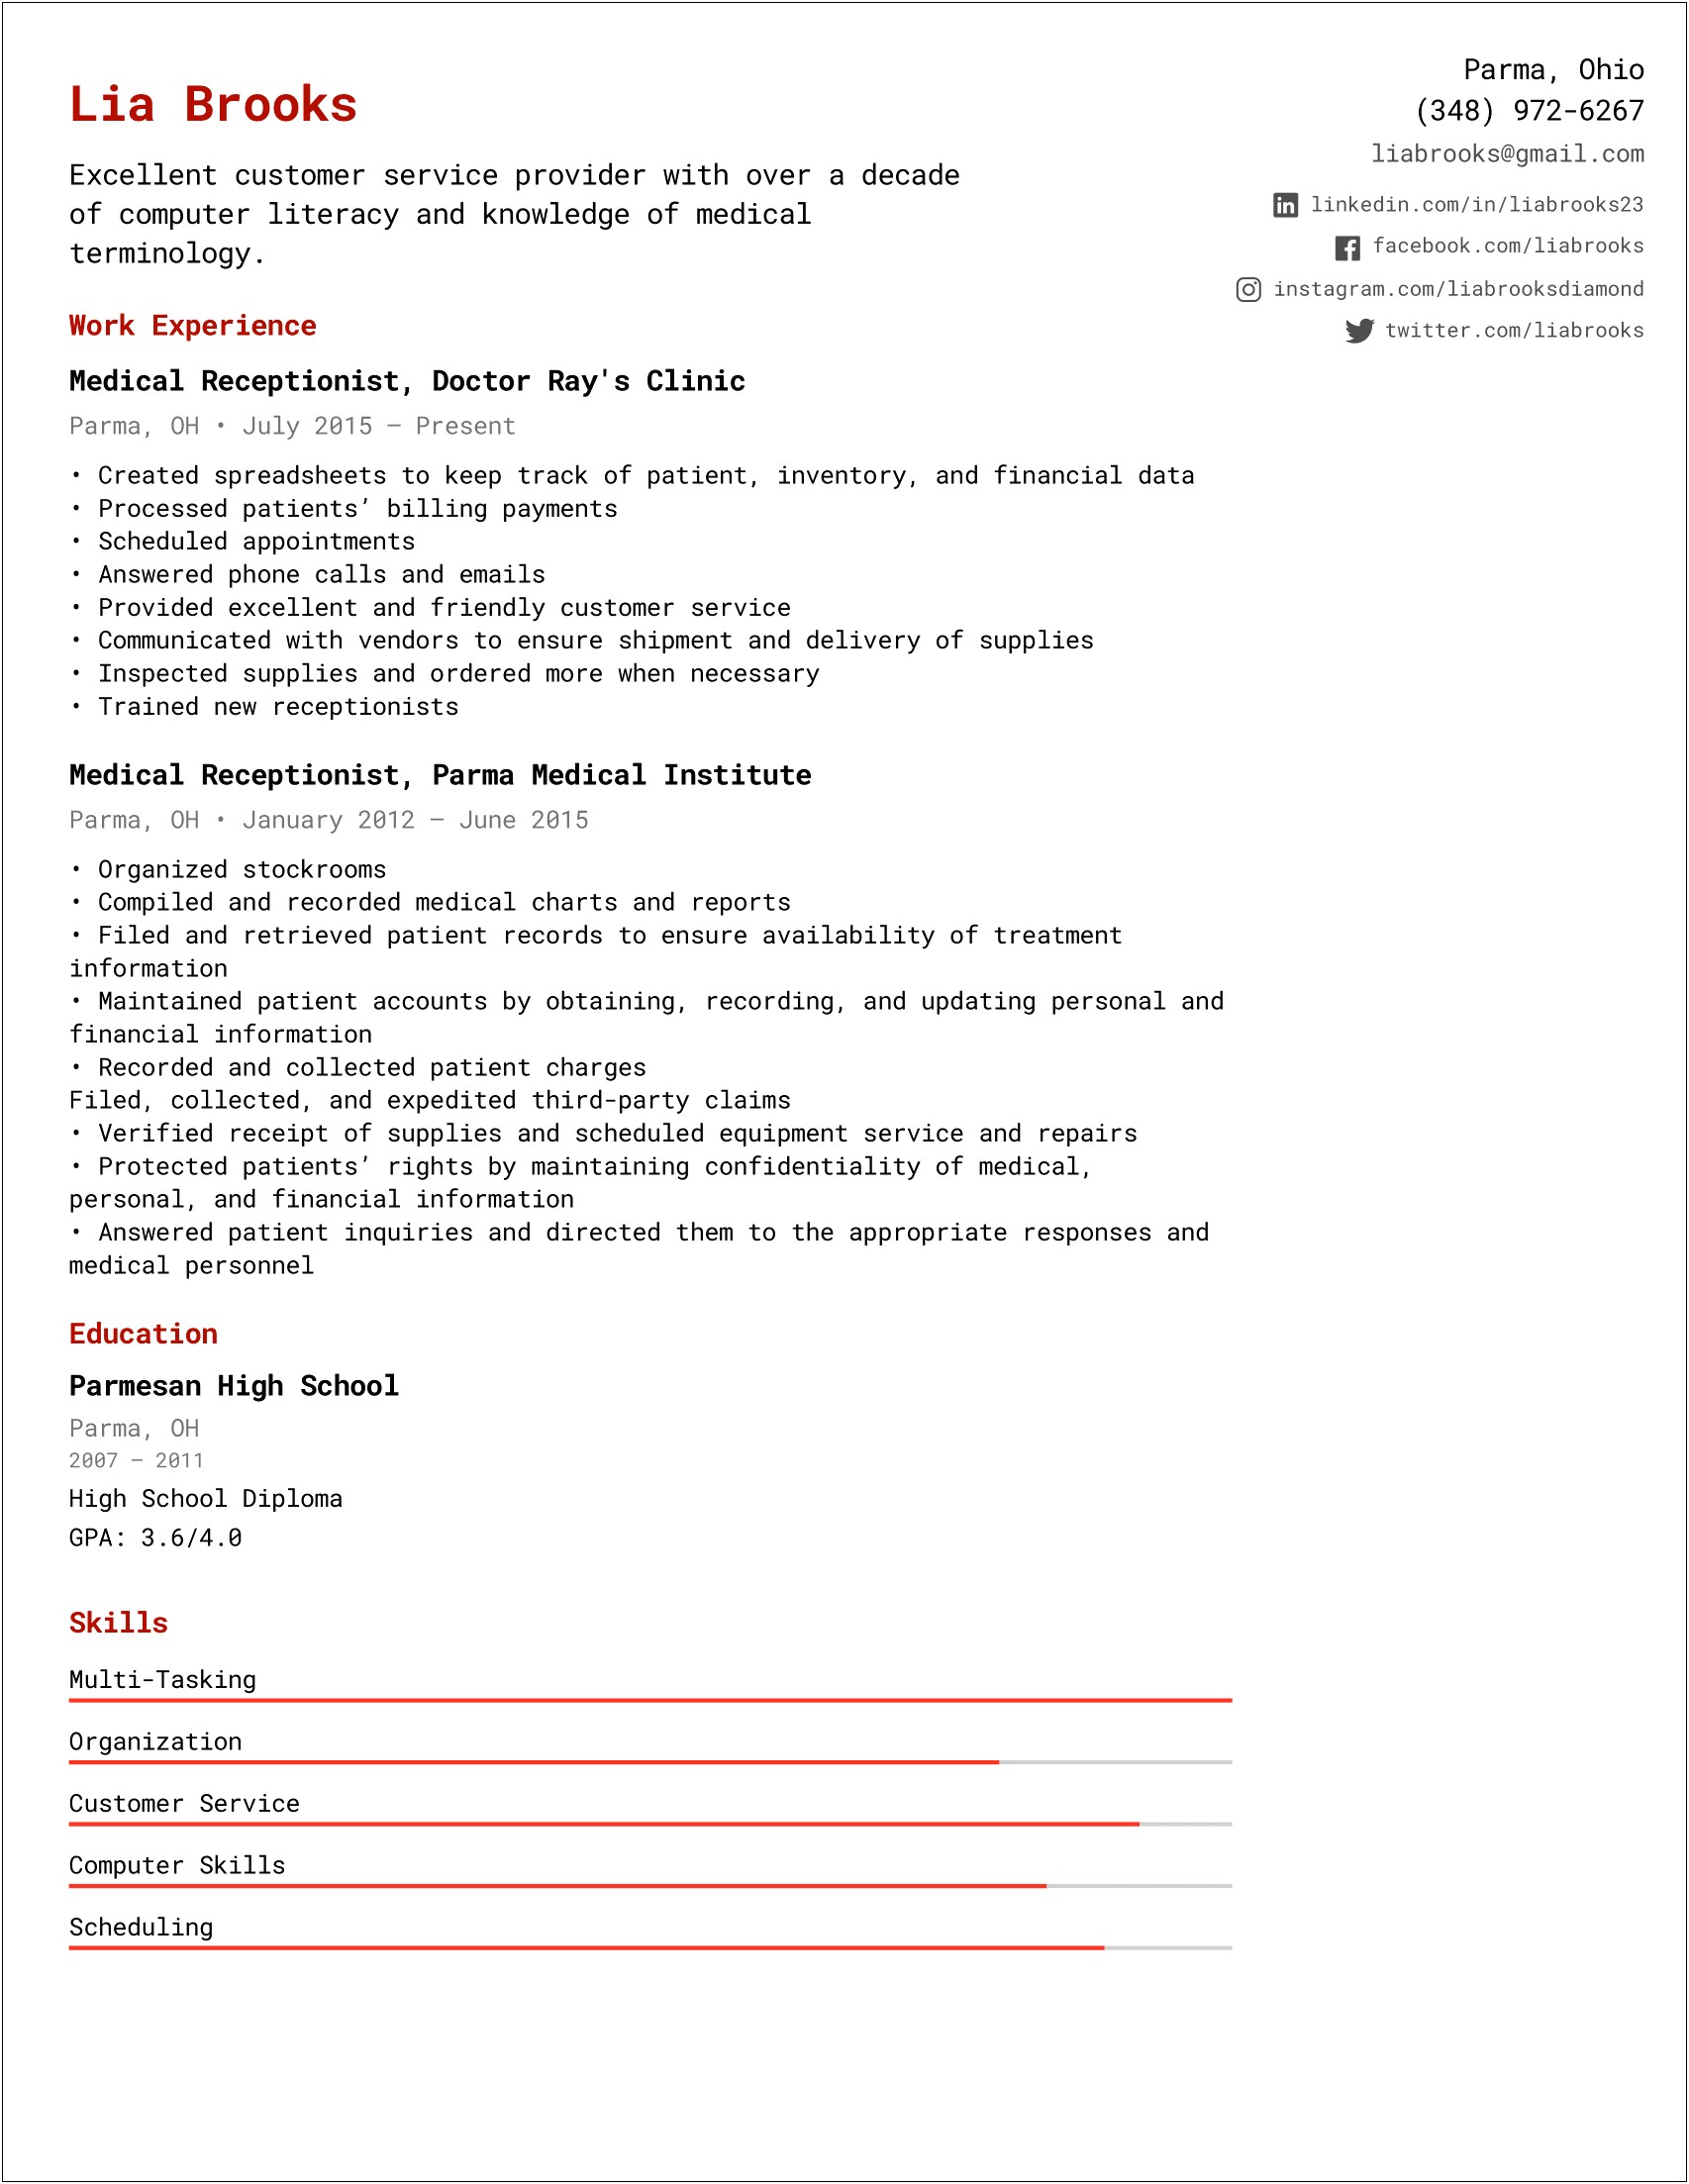 Samples Of Resumes For Receptionist Position